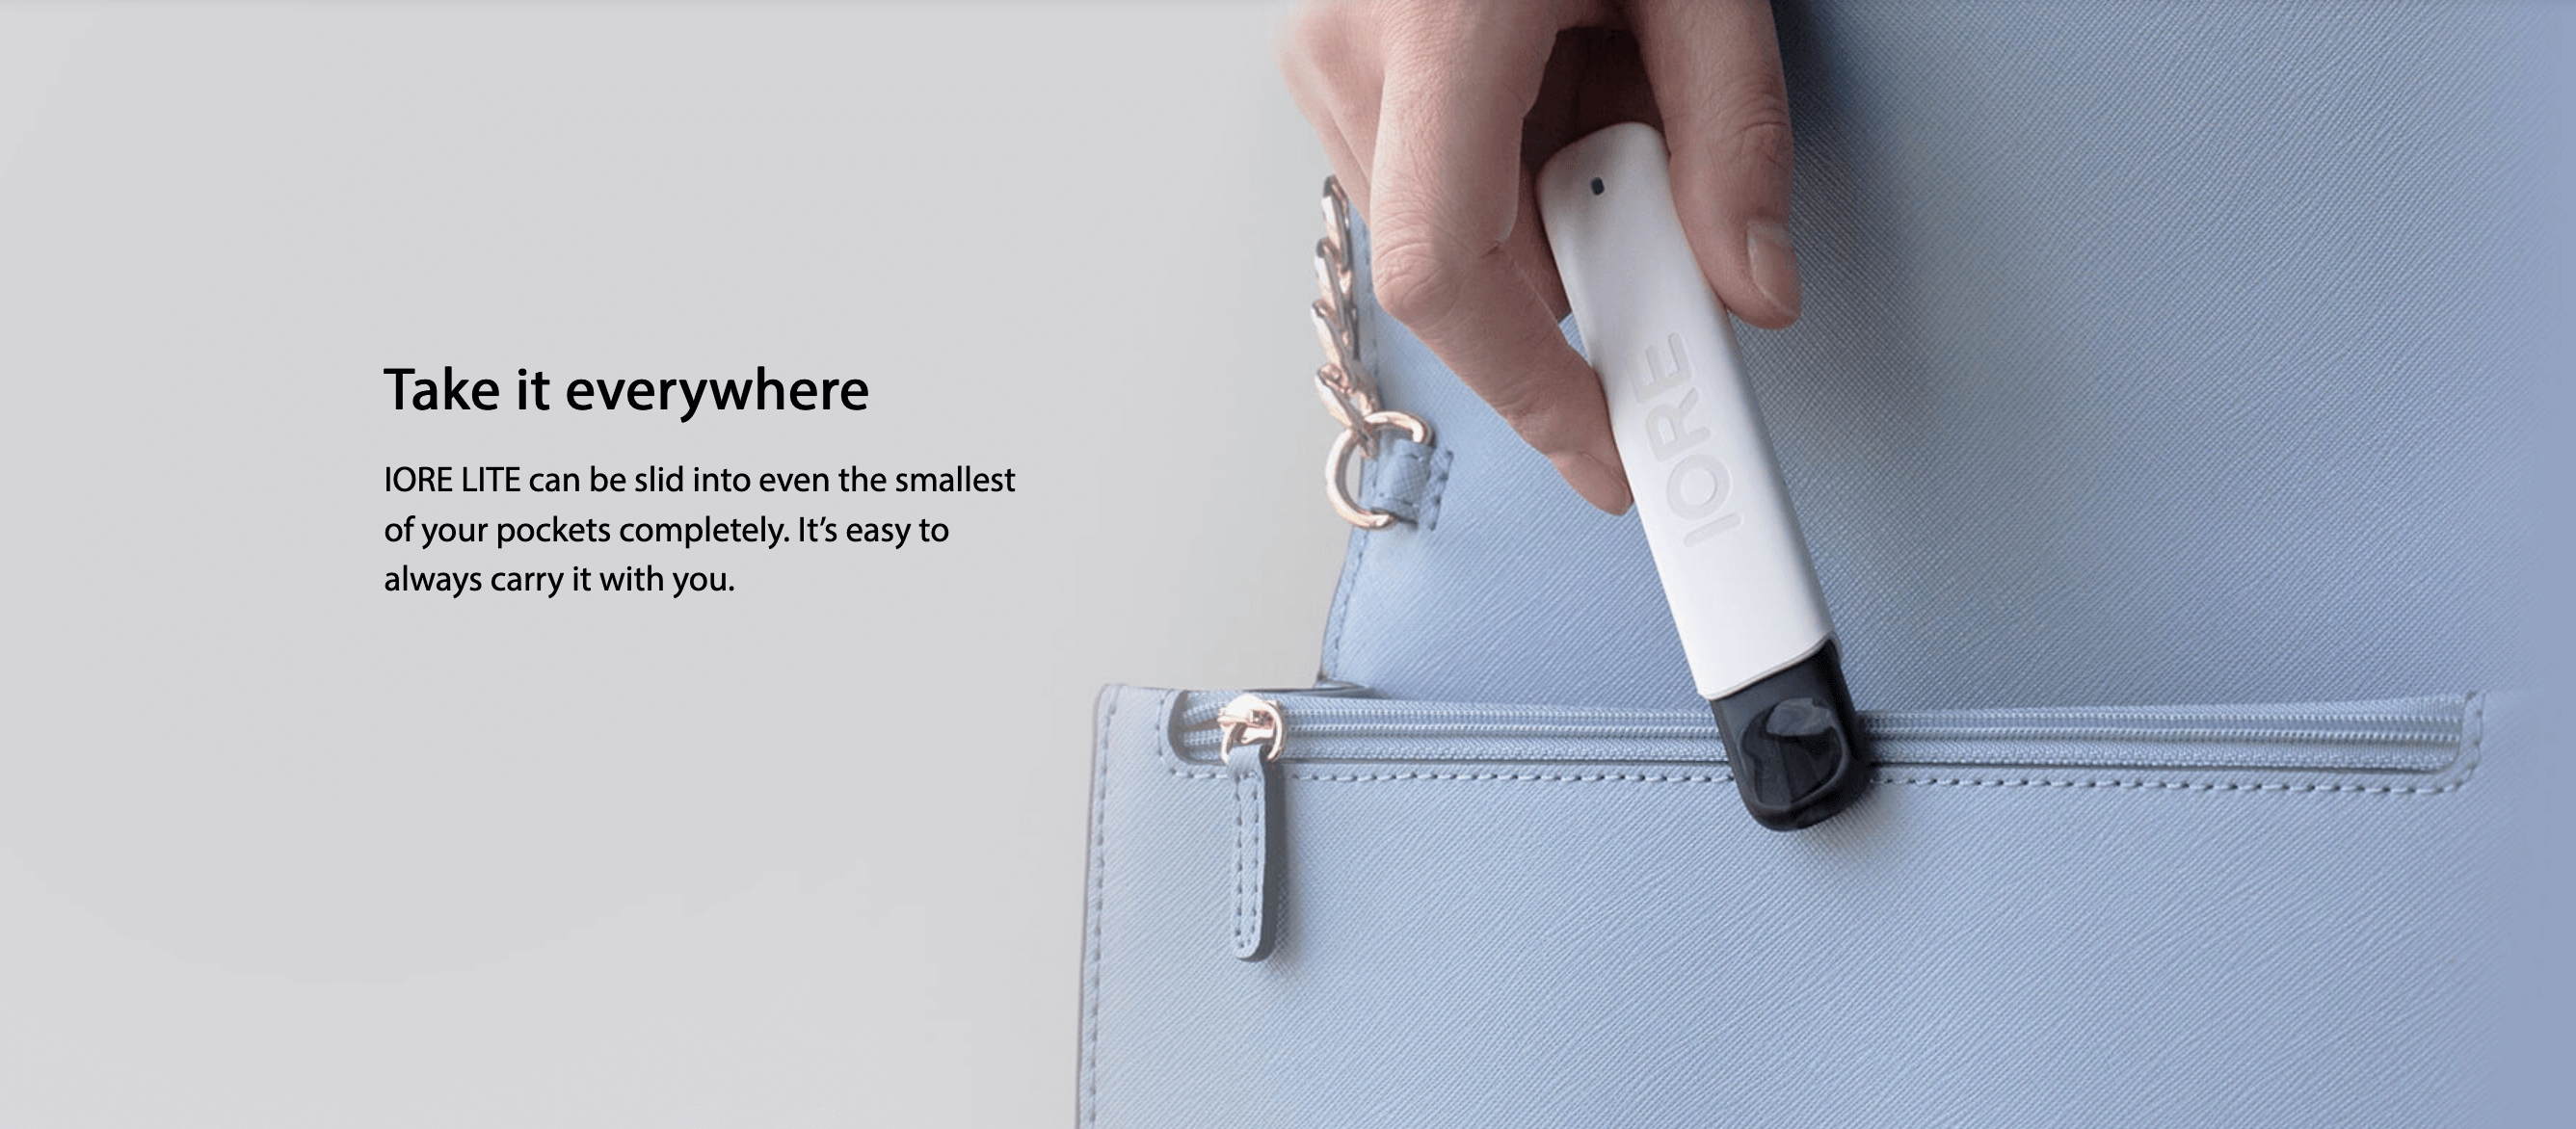 Eleaf IORE LITE - 'take it everywhere'. Image shows IORE being placed in handbag.